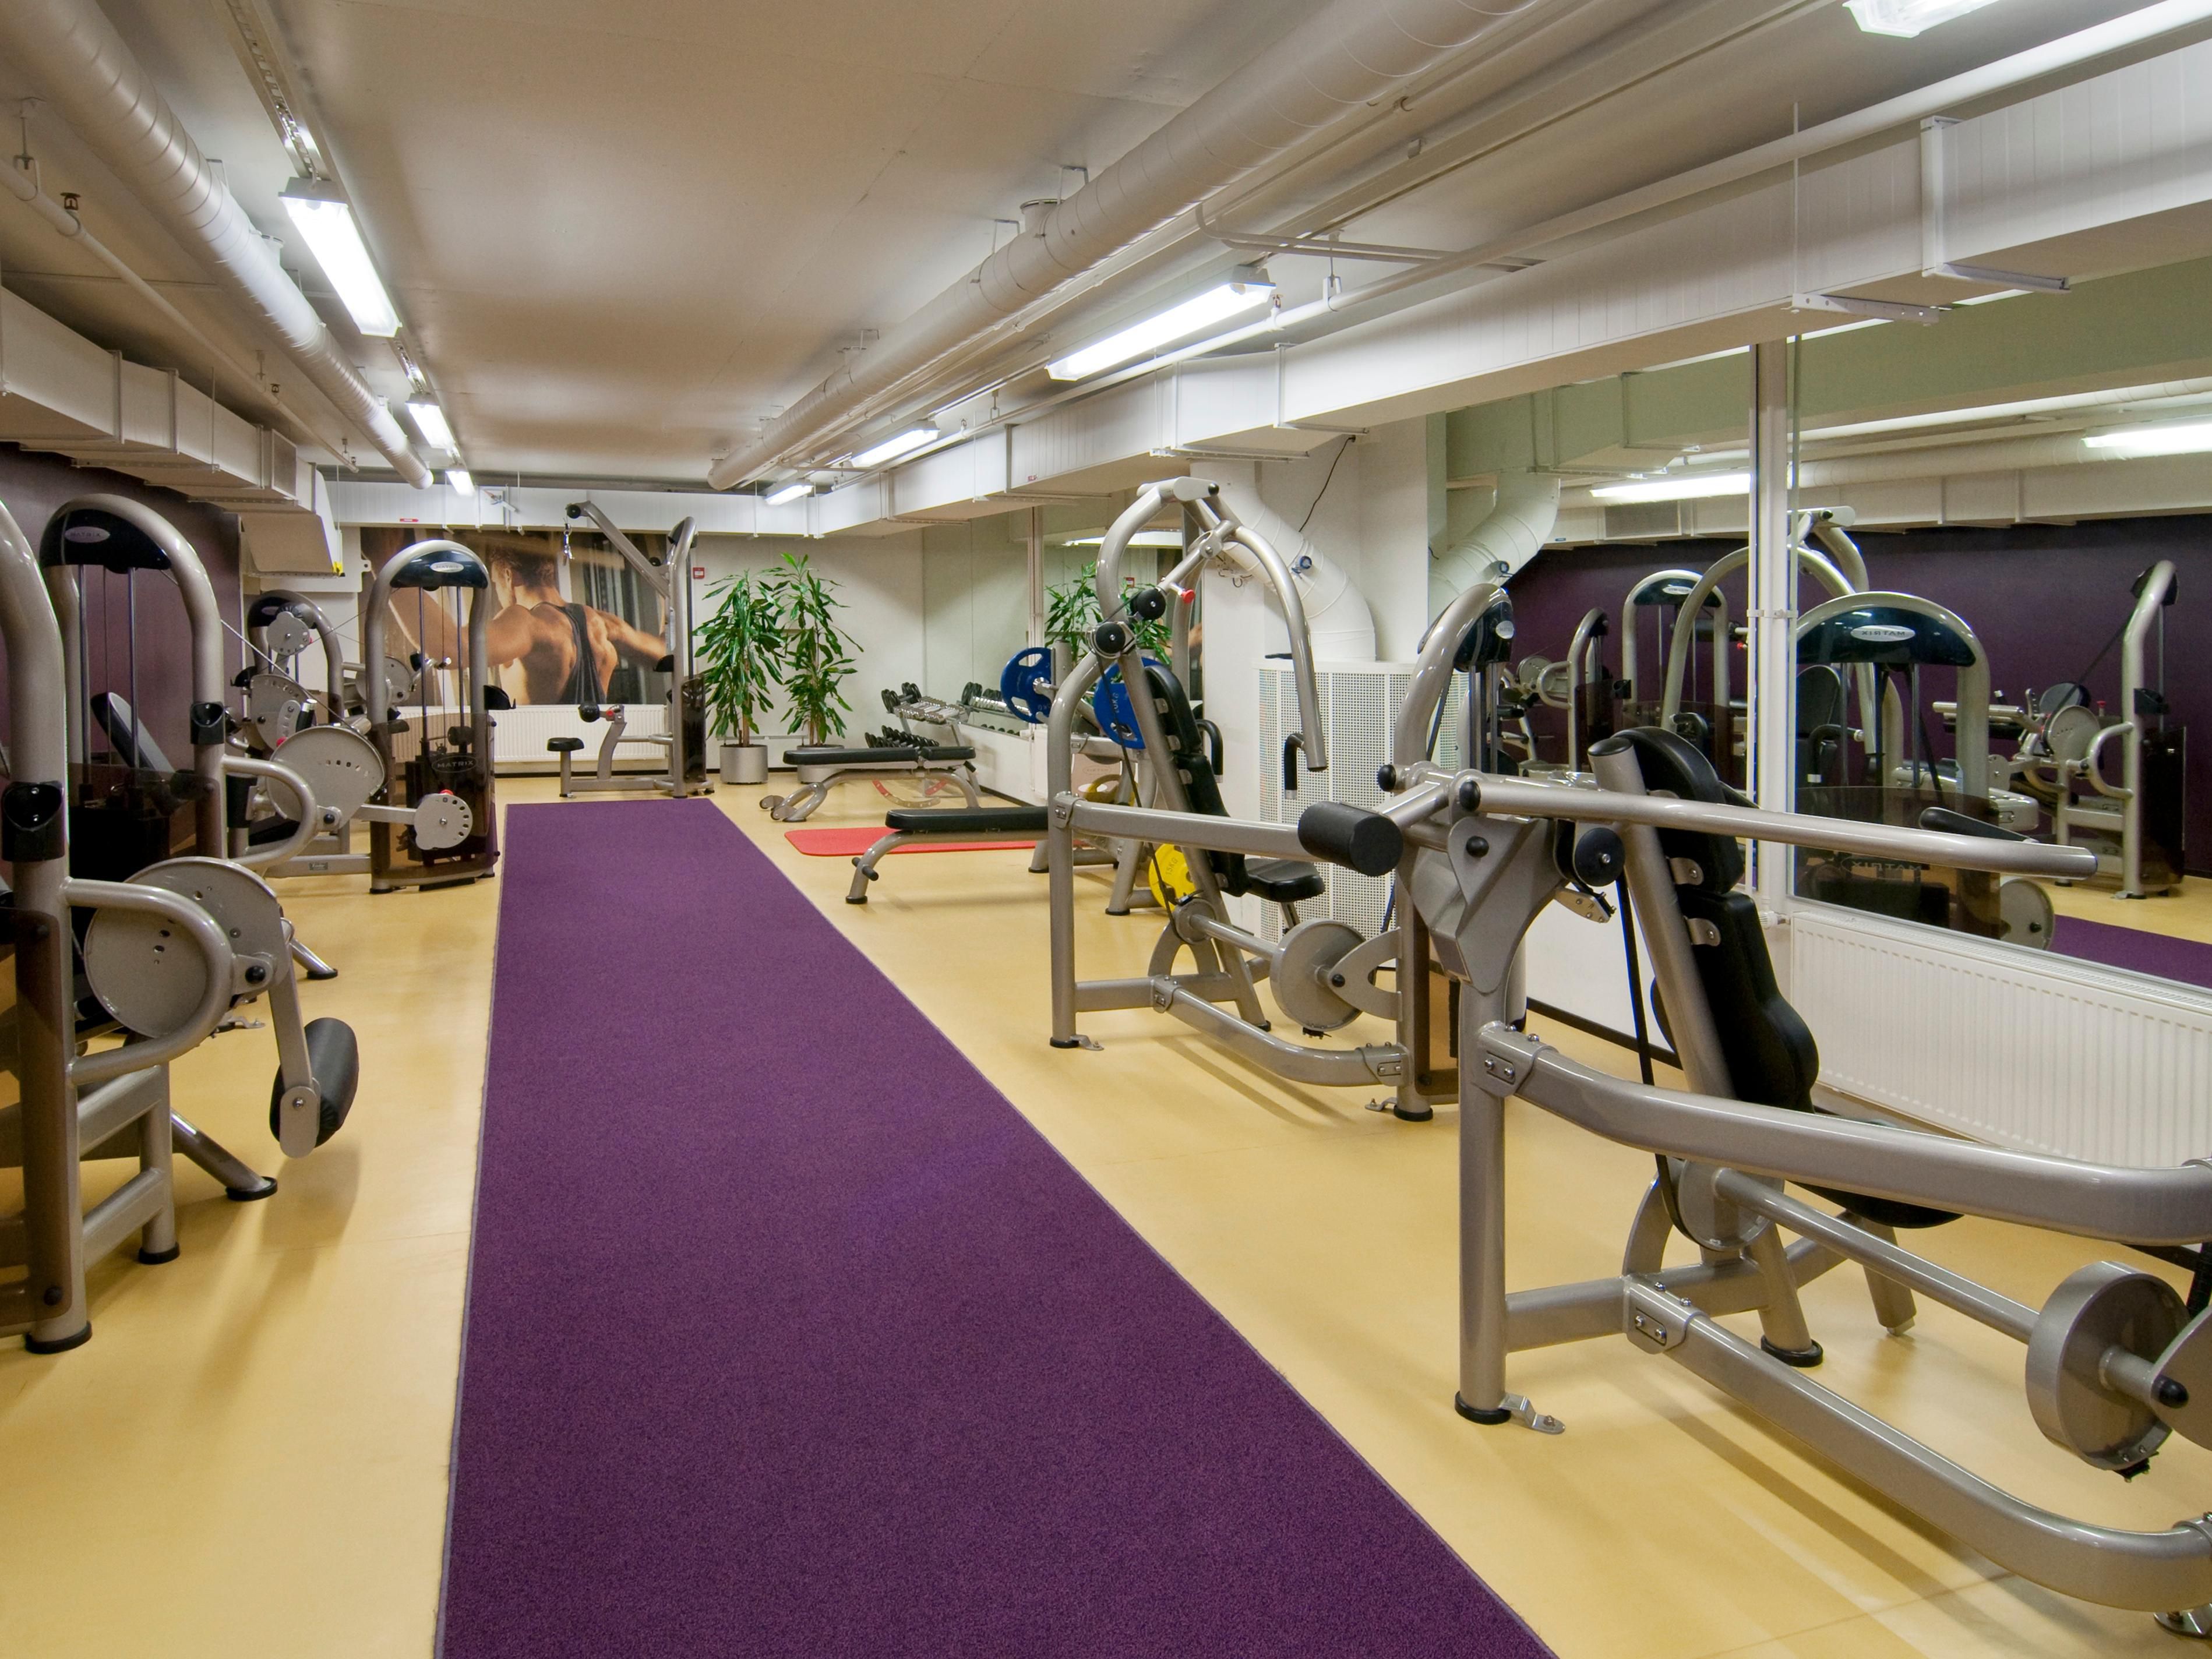 At our hotel and the surroundings, you can find lots of options on how to keep fit or to get in shape and take care of your body and mind. Our own well-equipped gym helps you to relieve the stress of the day, and we also borrow bikes. But if you need something extra, try the wall climbing arena close to our hotel.